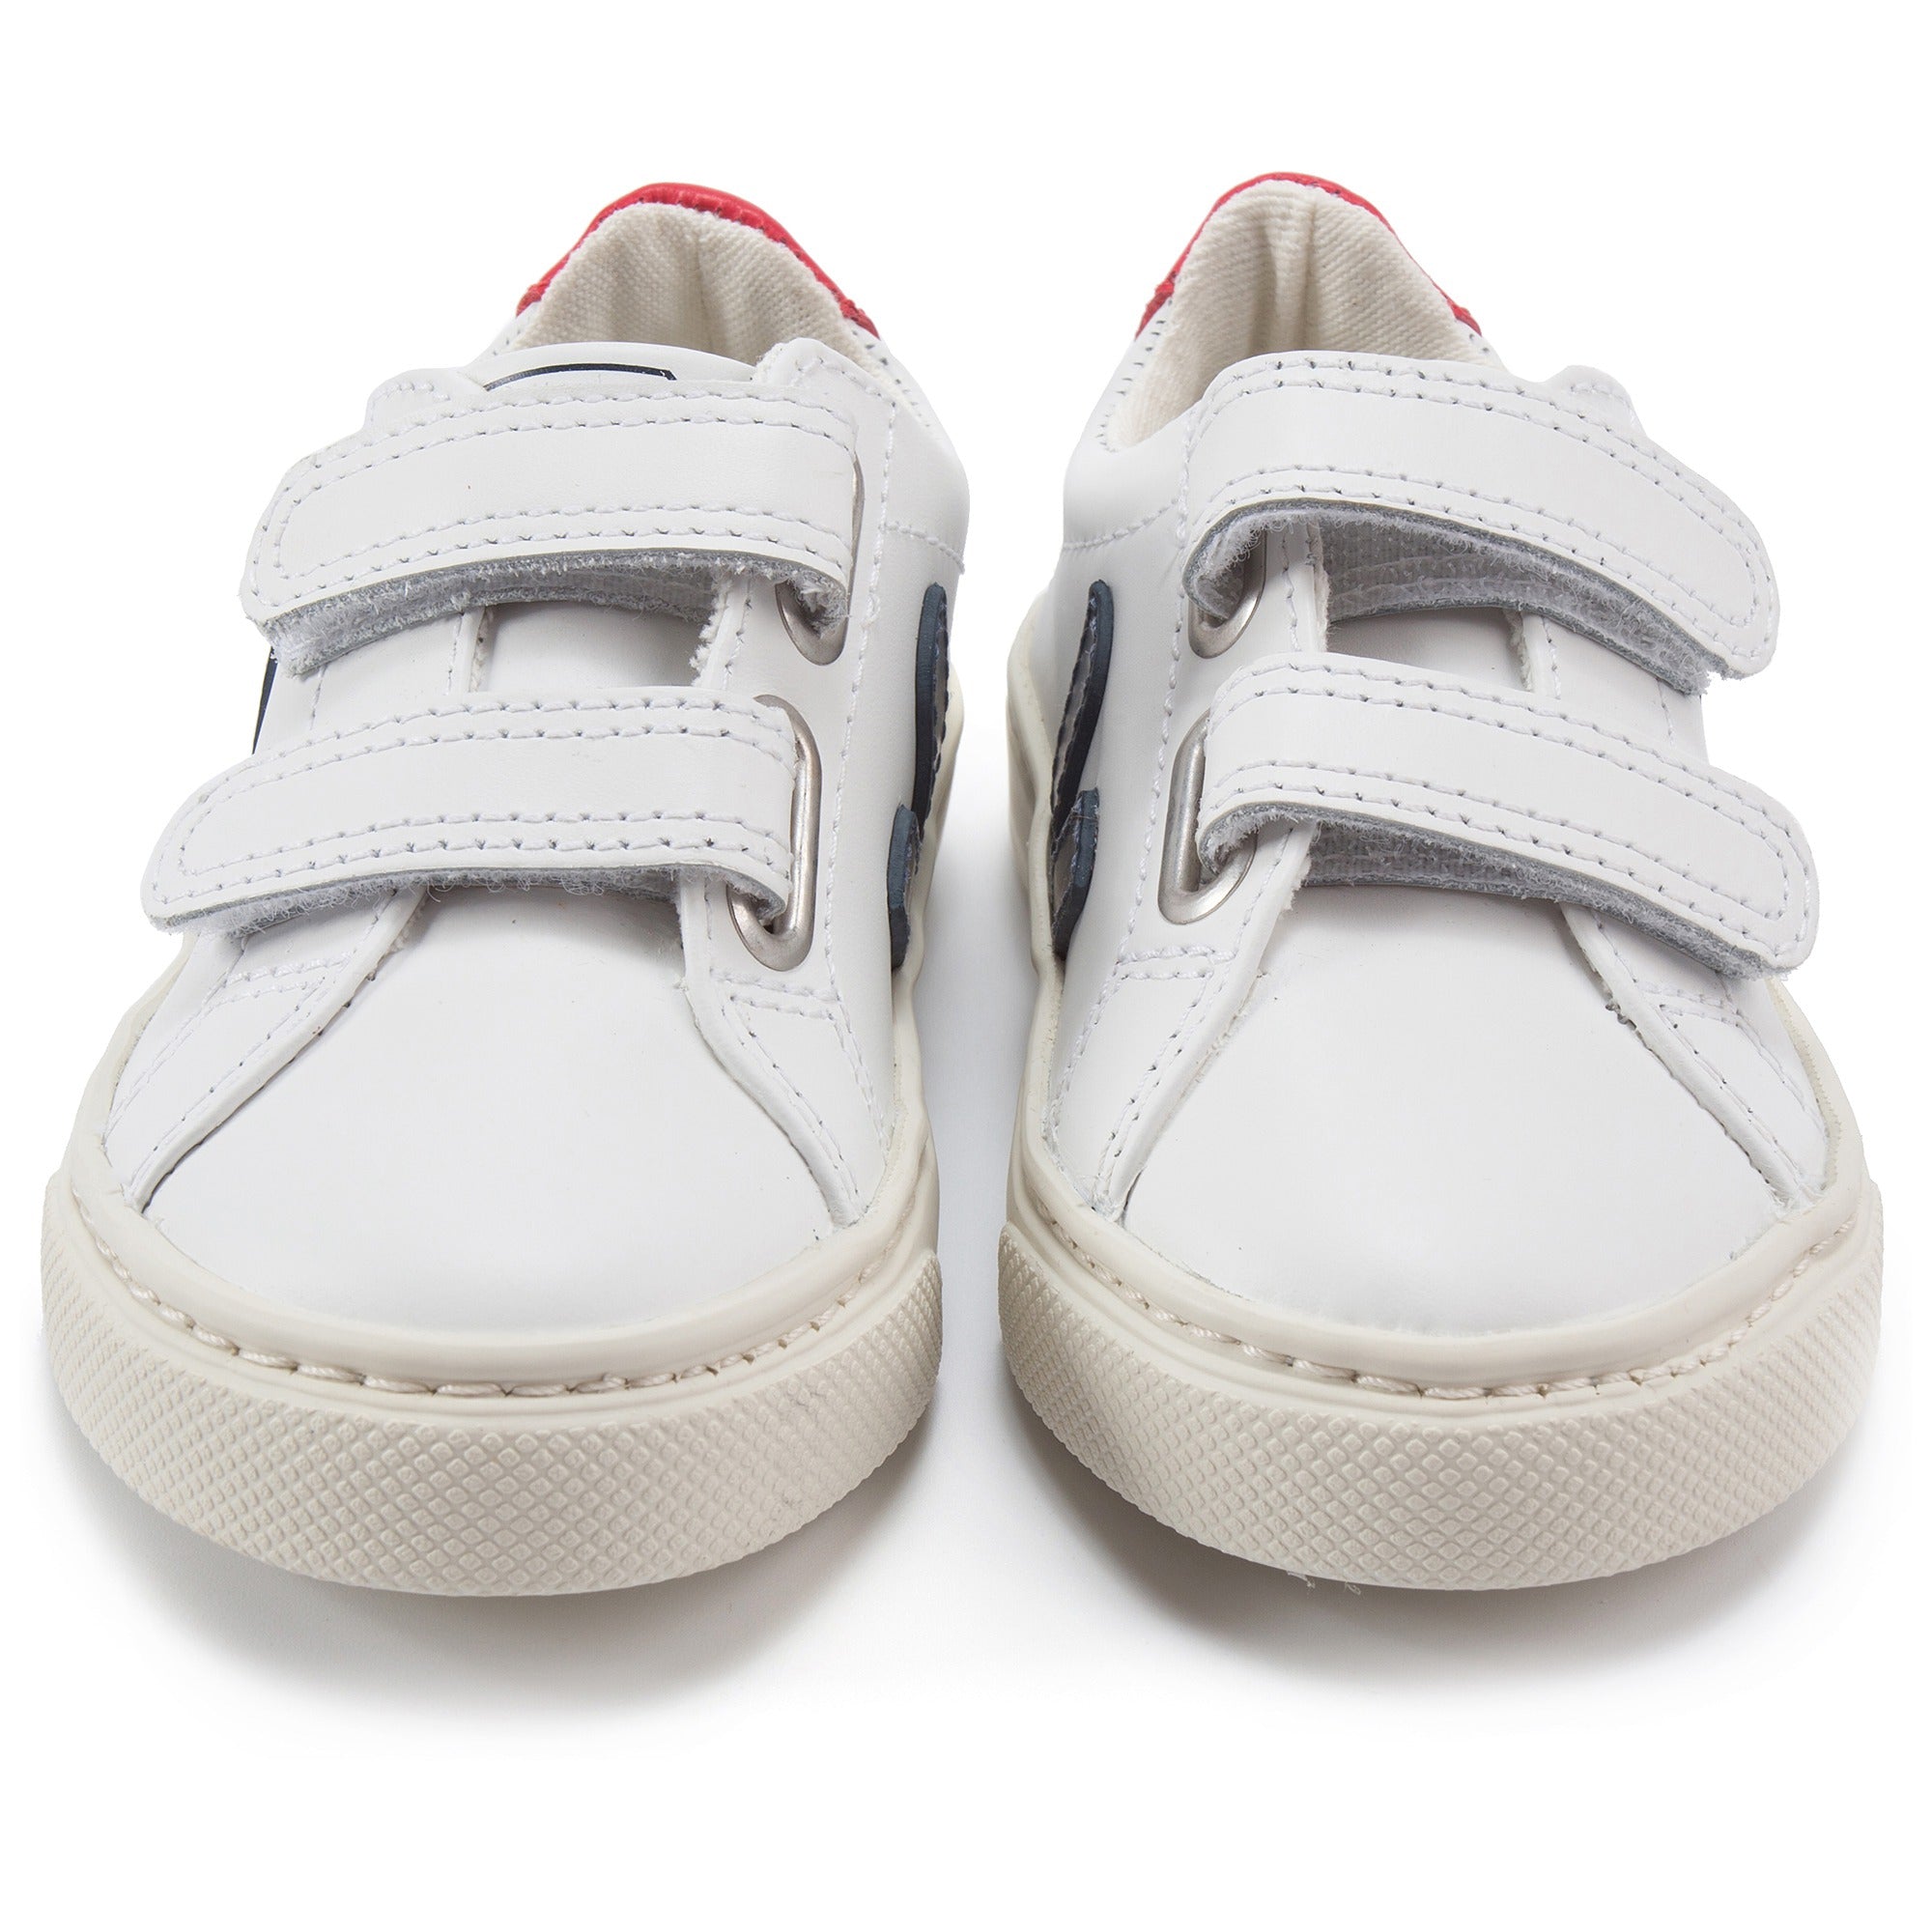 Baby White Leather Velcro With Blue "V" Shoes